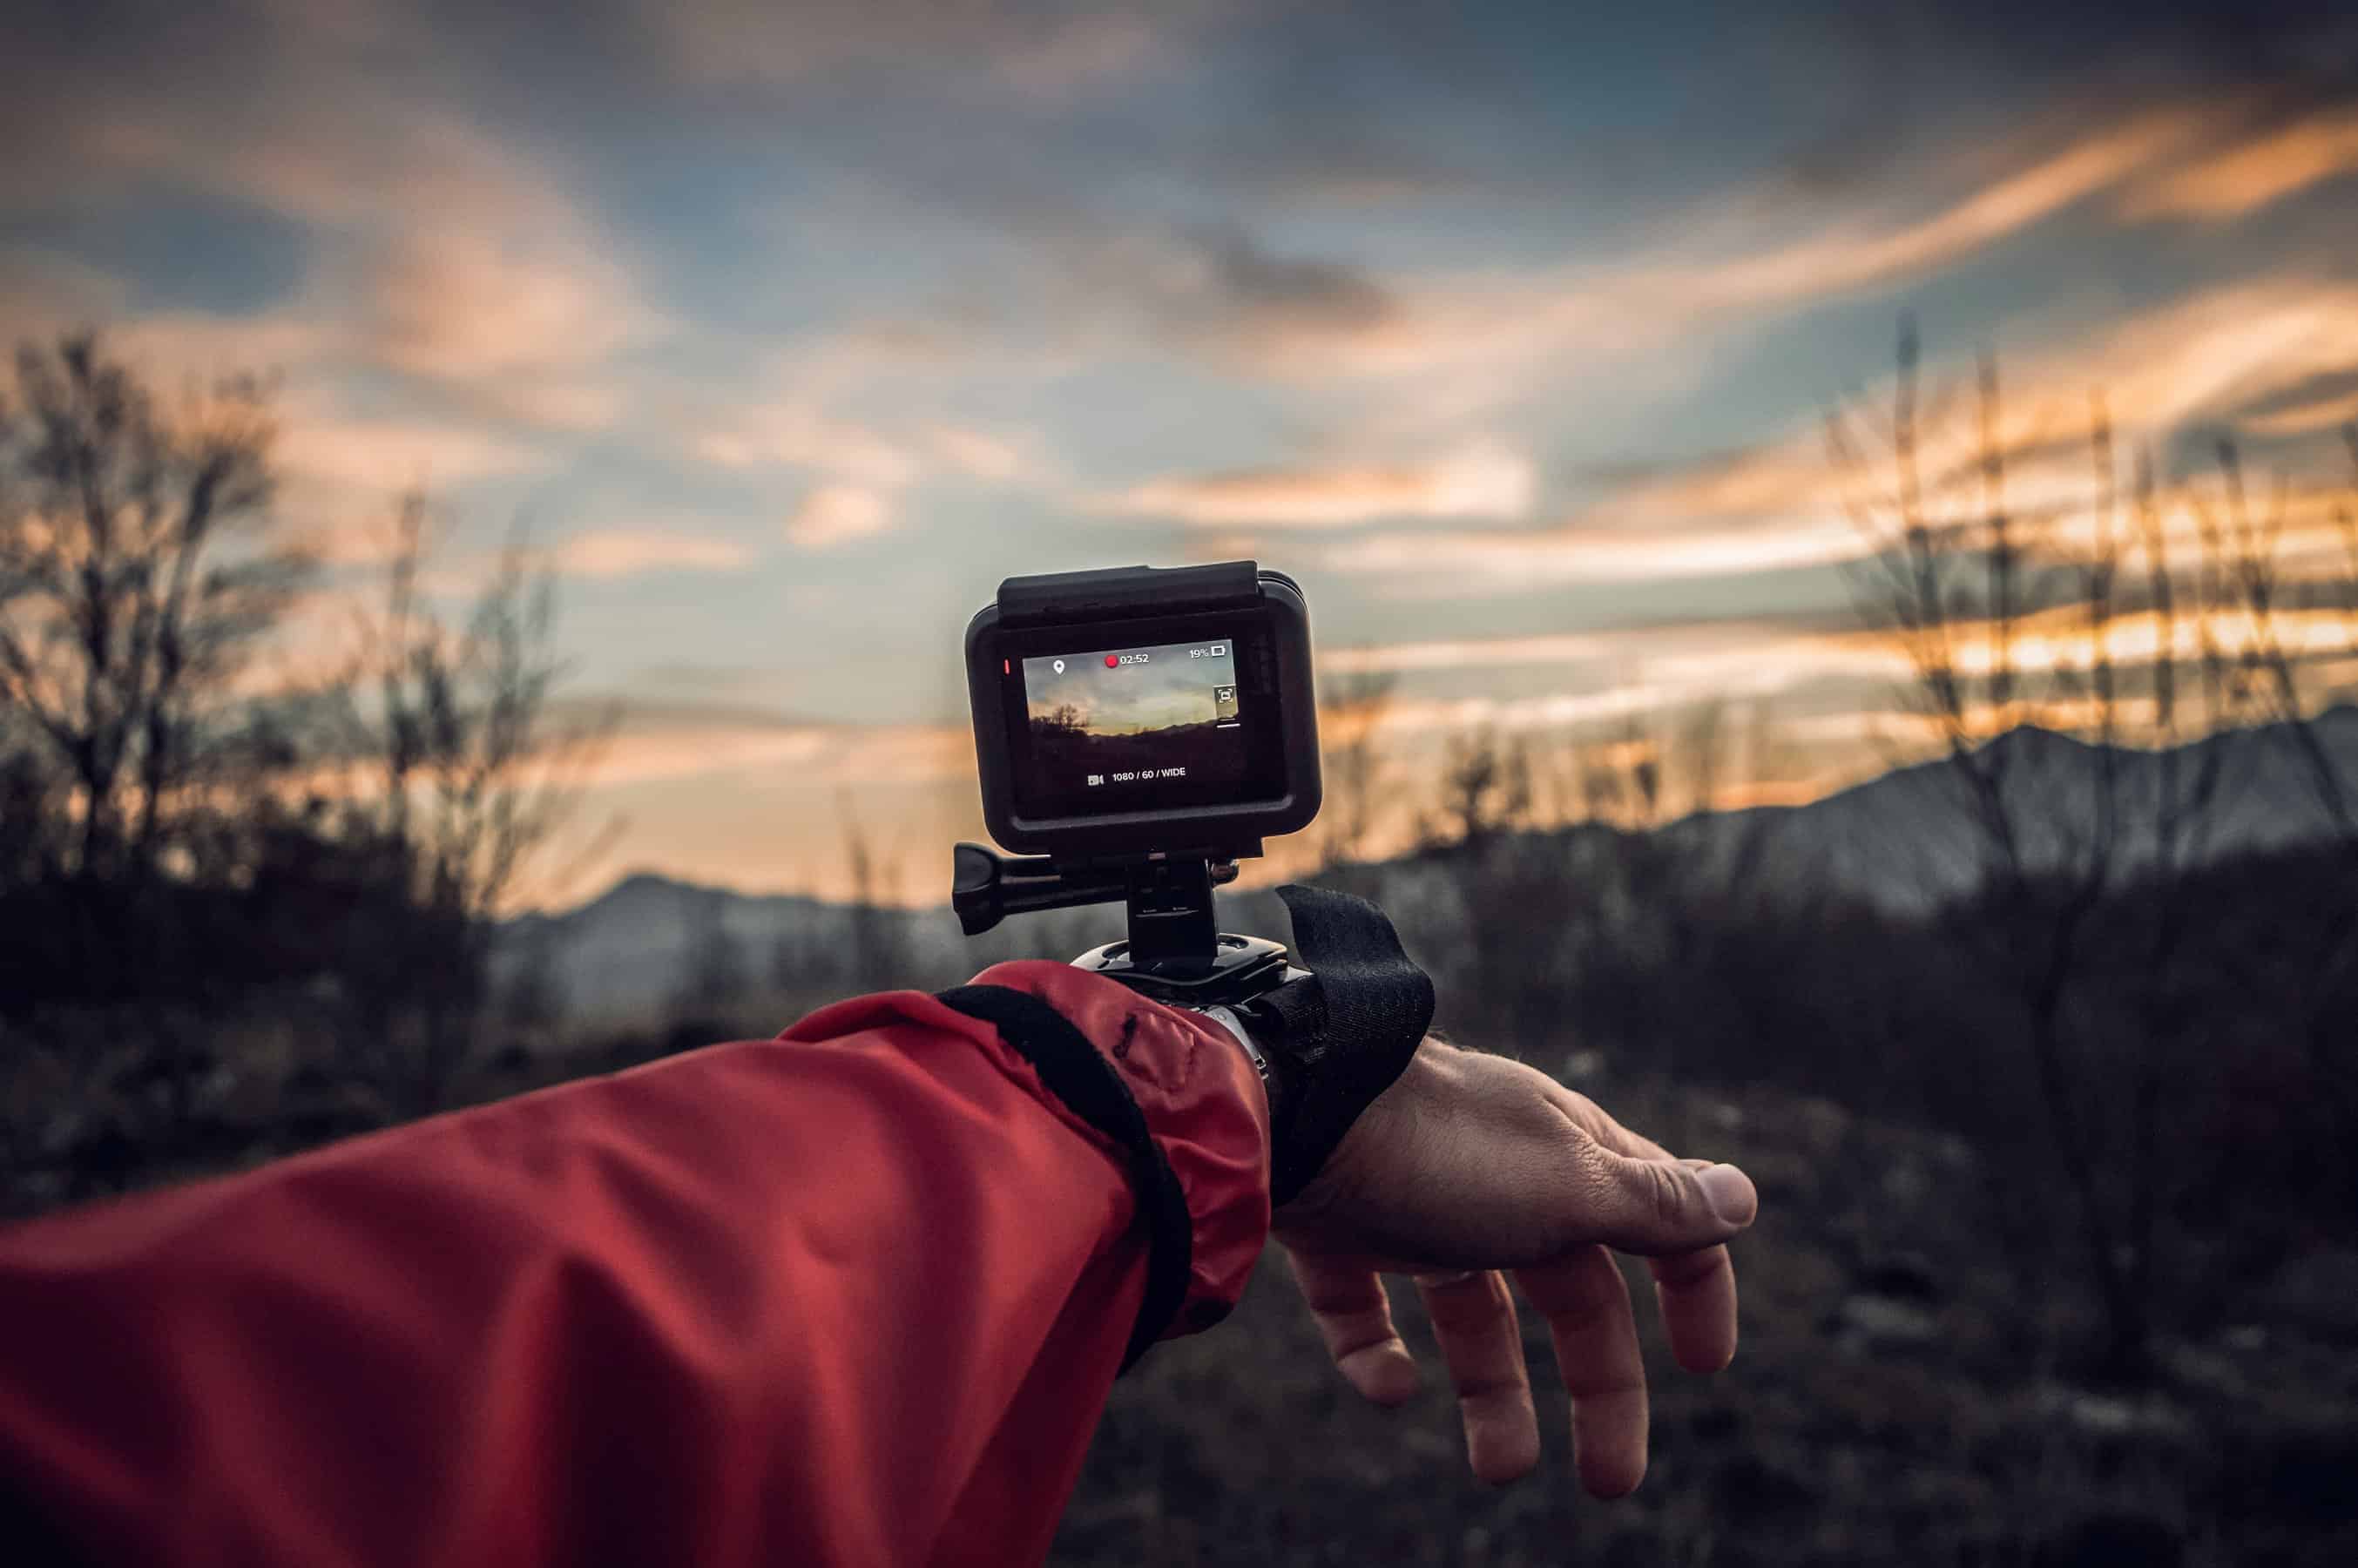 gopro to move operations to mexico due to increasing us-china trade tensions